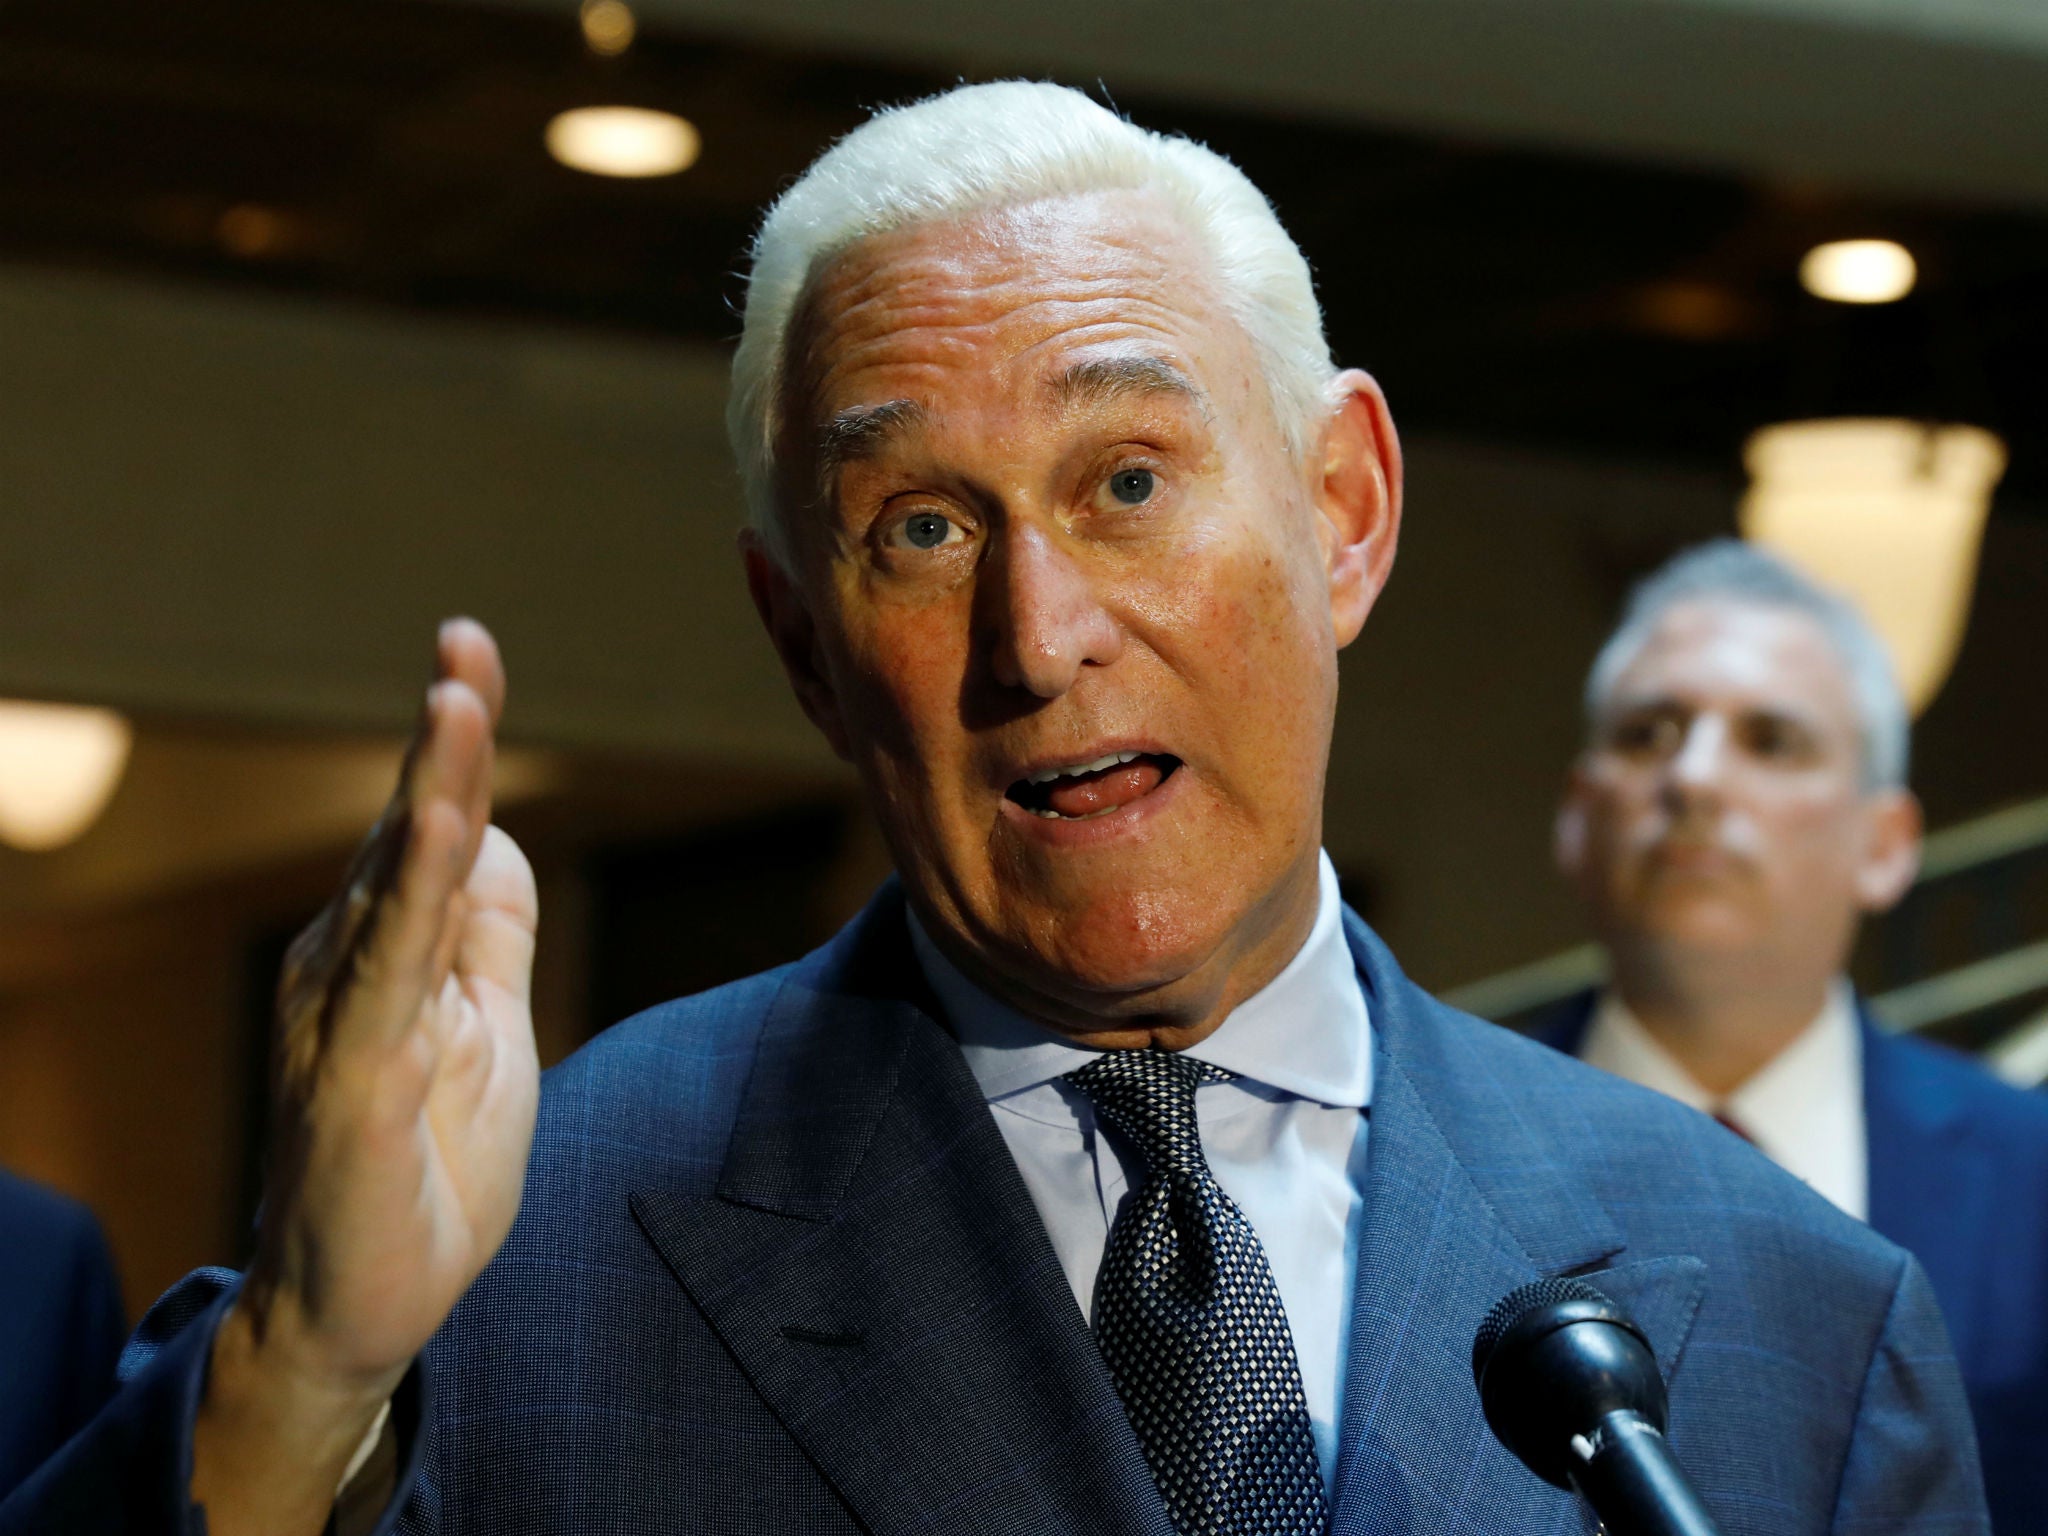 Roger Stone speaks to reporters after appearing before a closed House Intelligence Committee hearing investigating Russian interference in the 2016 presidential election